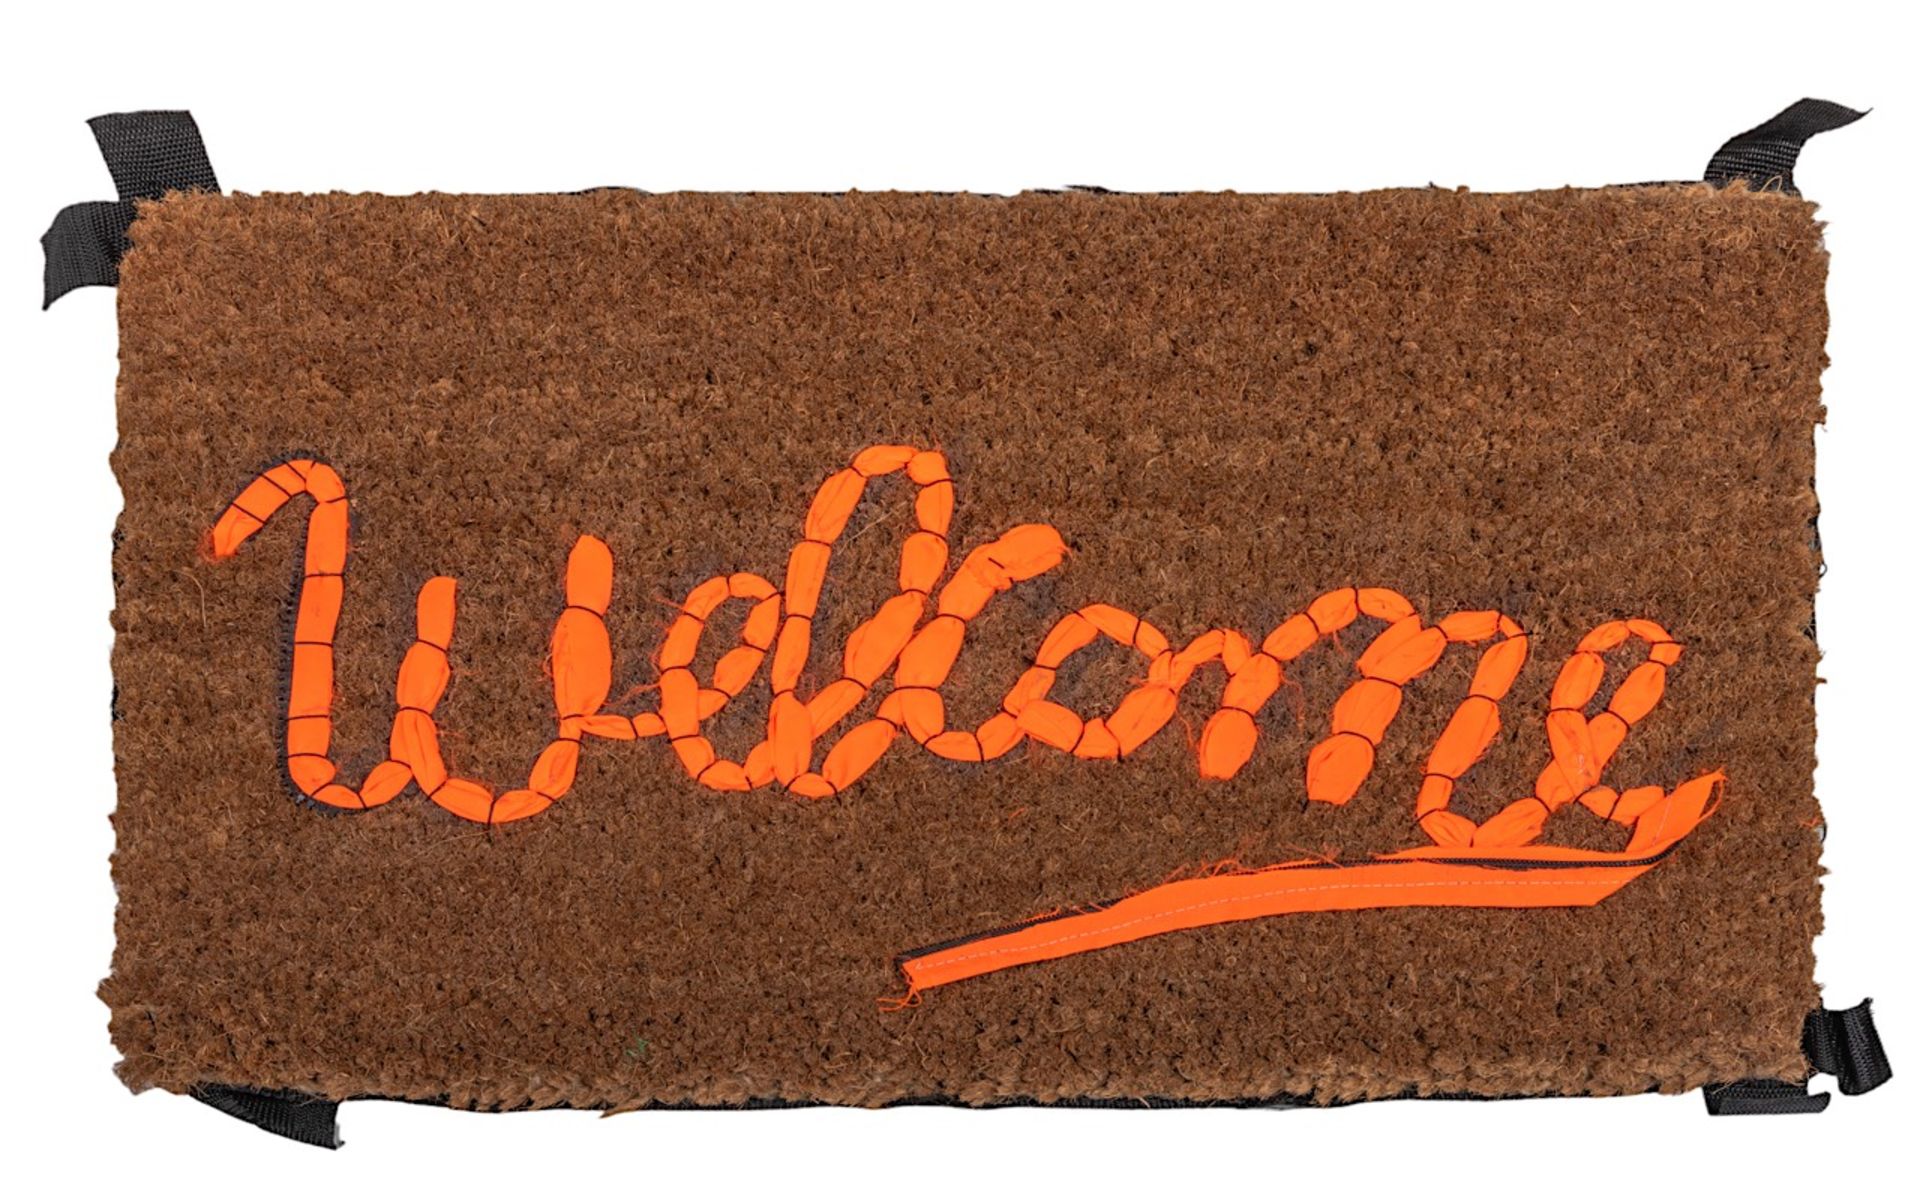 Banksy (1974), Welcome mat, edition by 'Gross Domestic Product', Ndeg 2316 40 x 60 cm. (15 3/4 x 23.